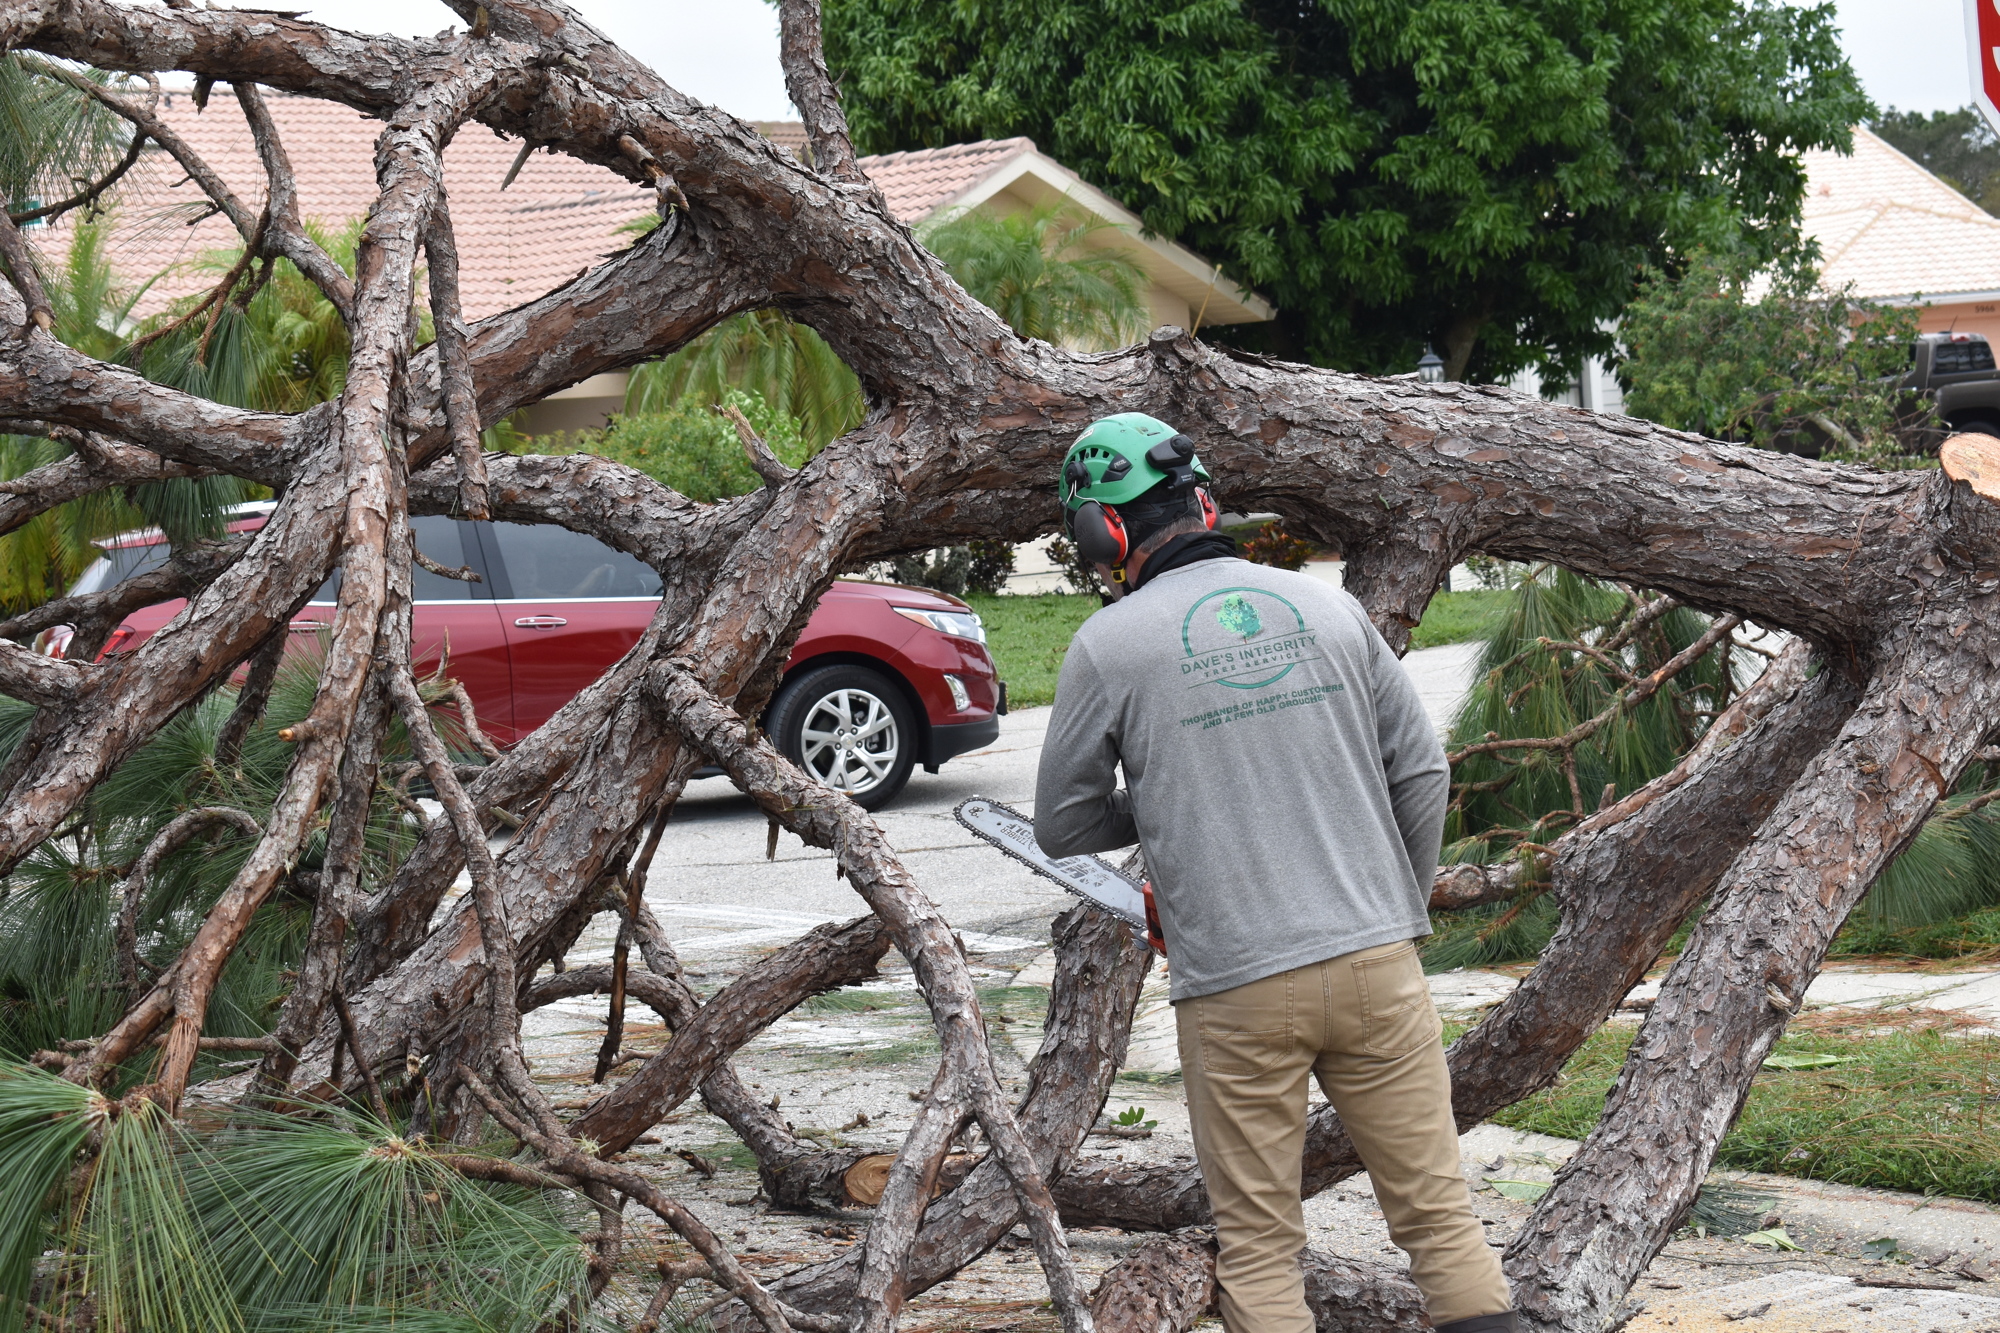 A crew member of Dave's Integrity Tree Service cuts and prepares to remove a pine tree that toppled on DelSol Boulevard near Longwood Park in North Sarasota County. (Photo by Eric Garwood)